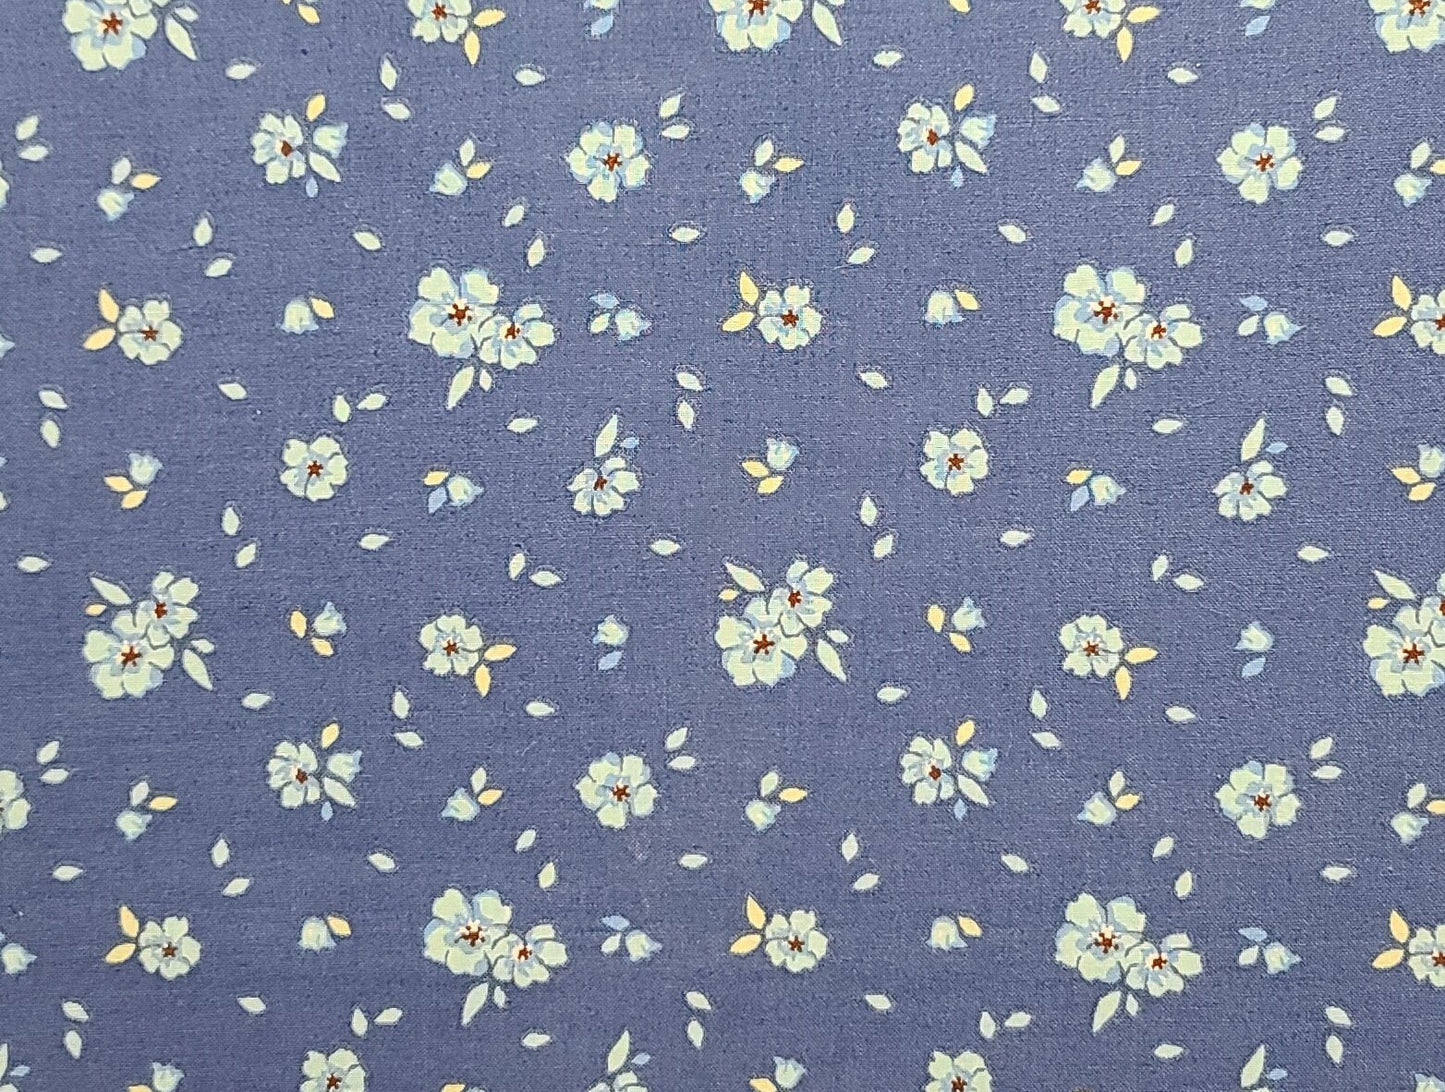 2005 Those Characters from Cleveland Inc Springs Industries Inc #1197 - Medium Blue Fabric / Light Blue, Dark Red, Cream Flower Print